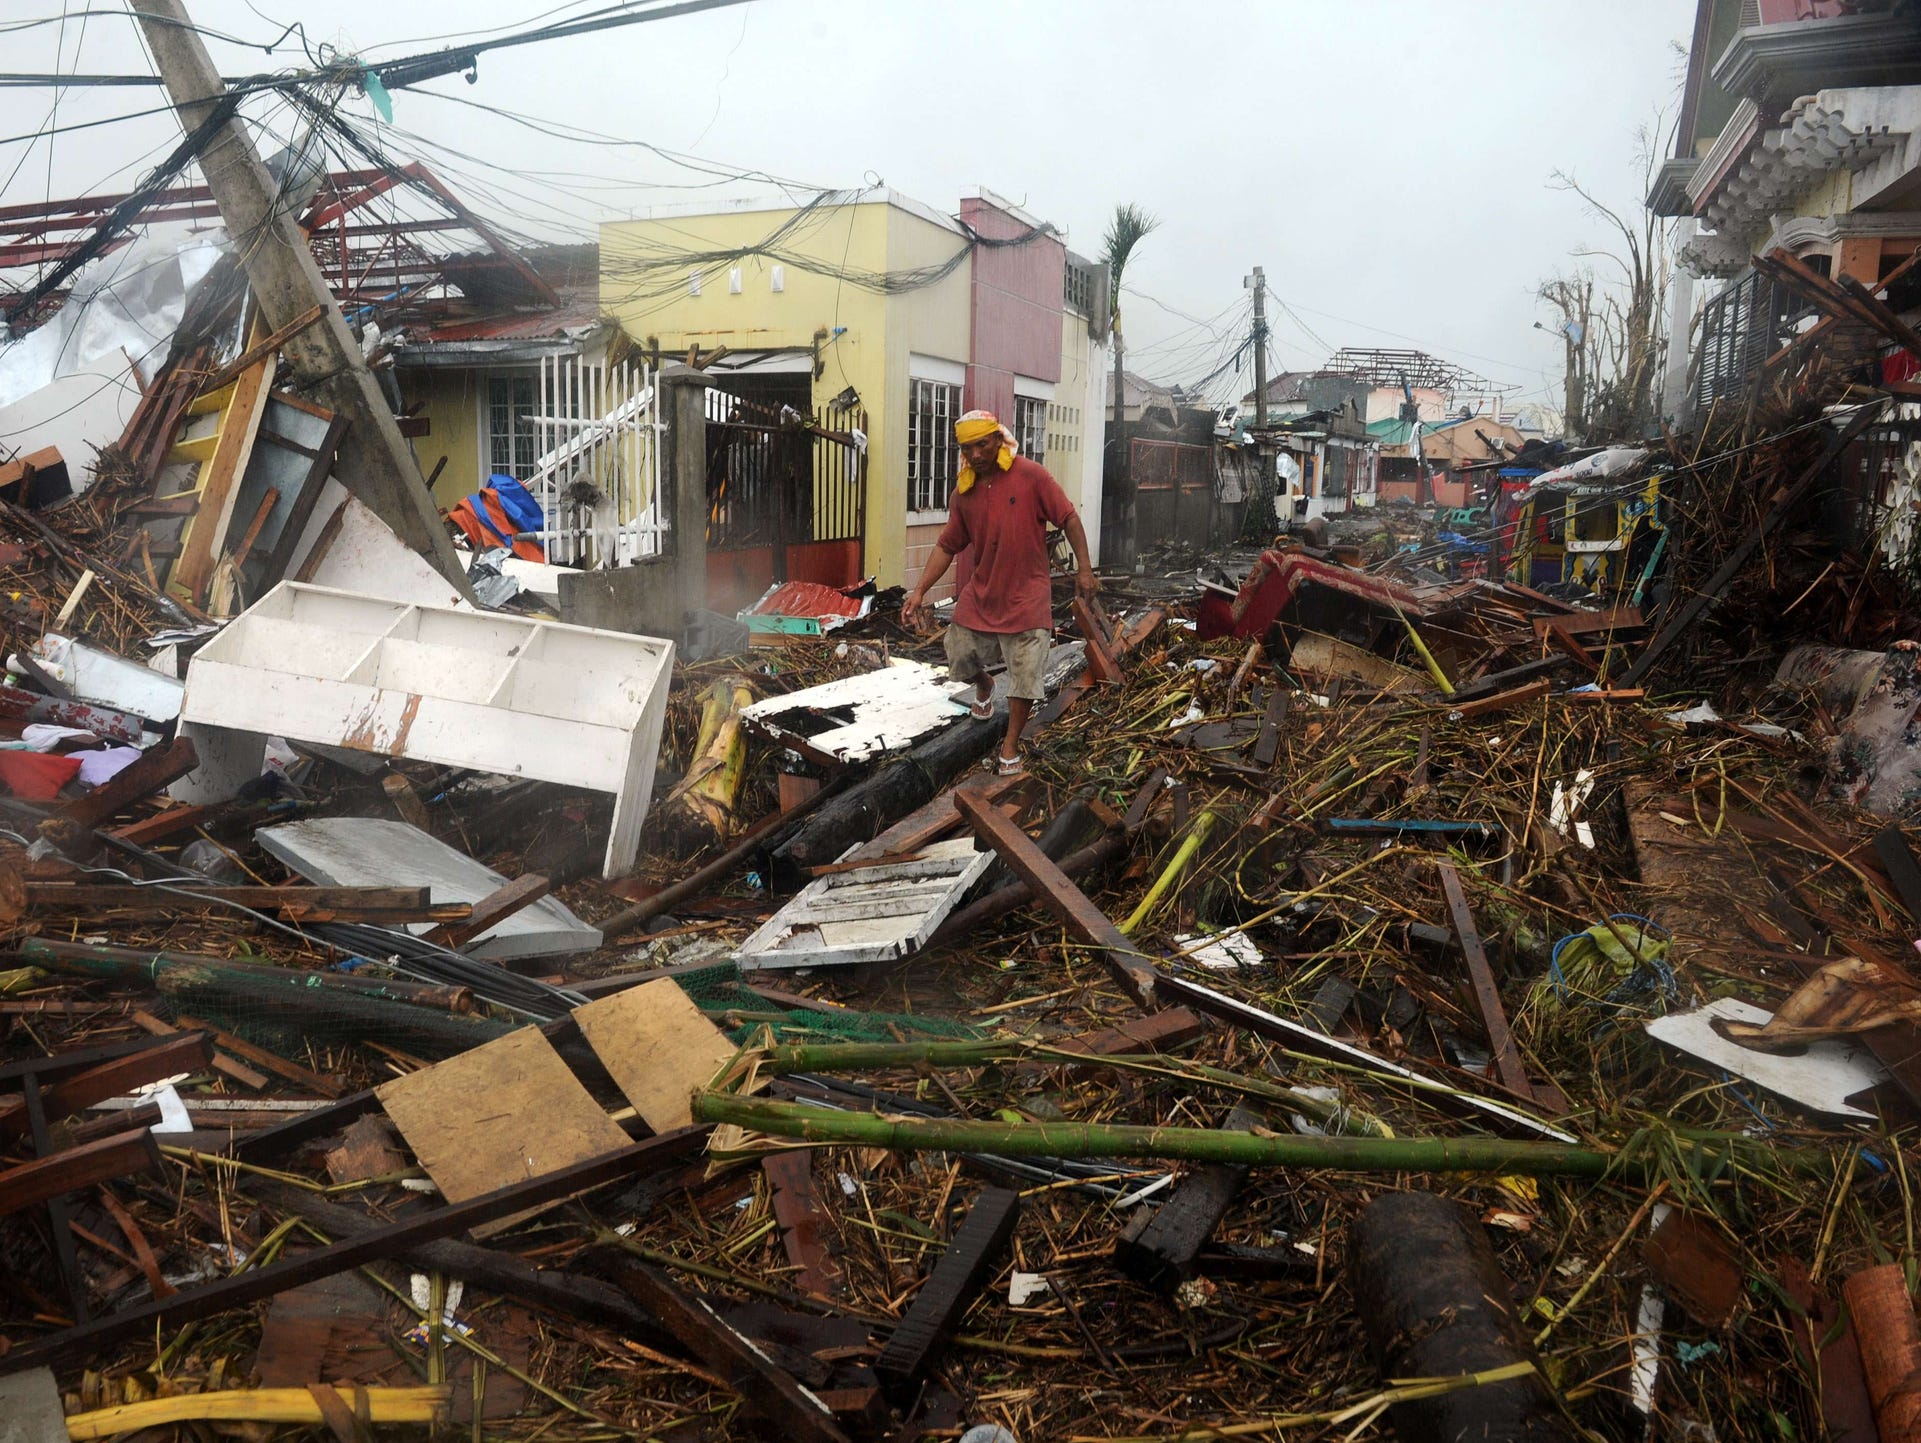 A man walks among debris of destroyed houses in Tacloban.